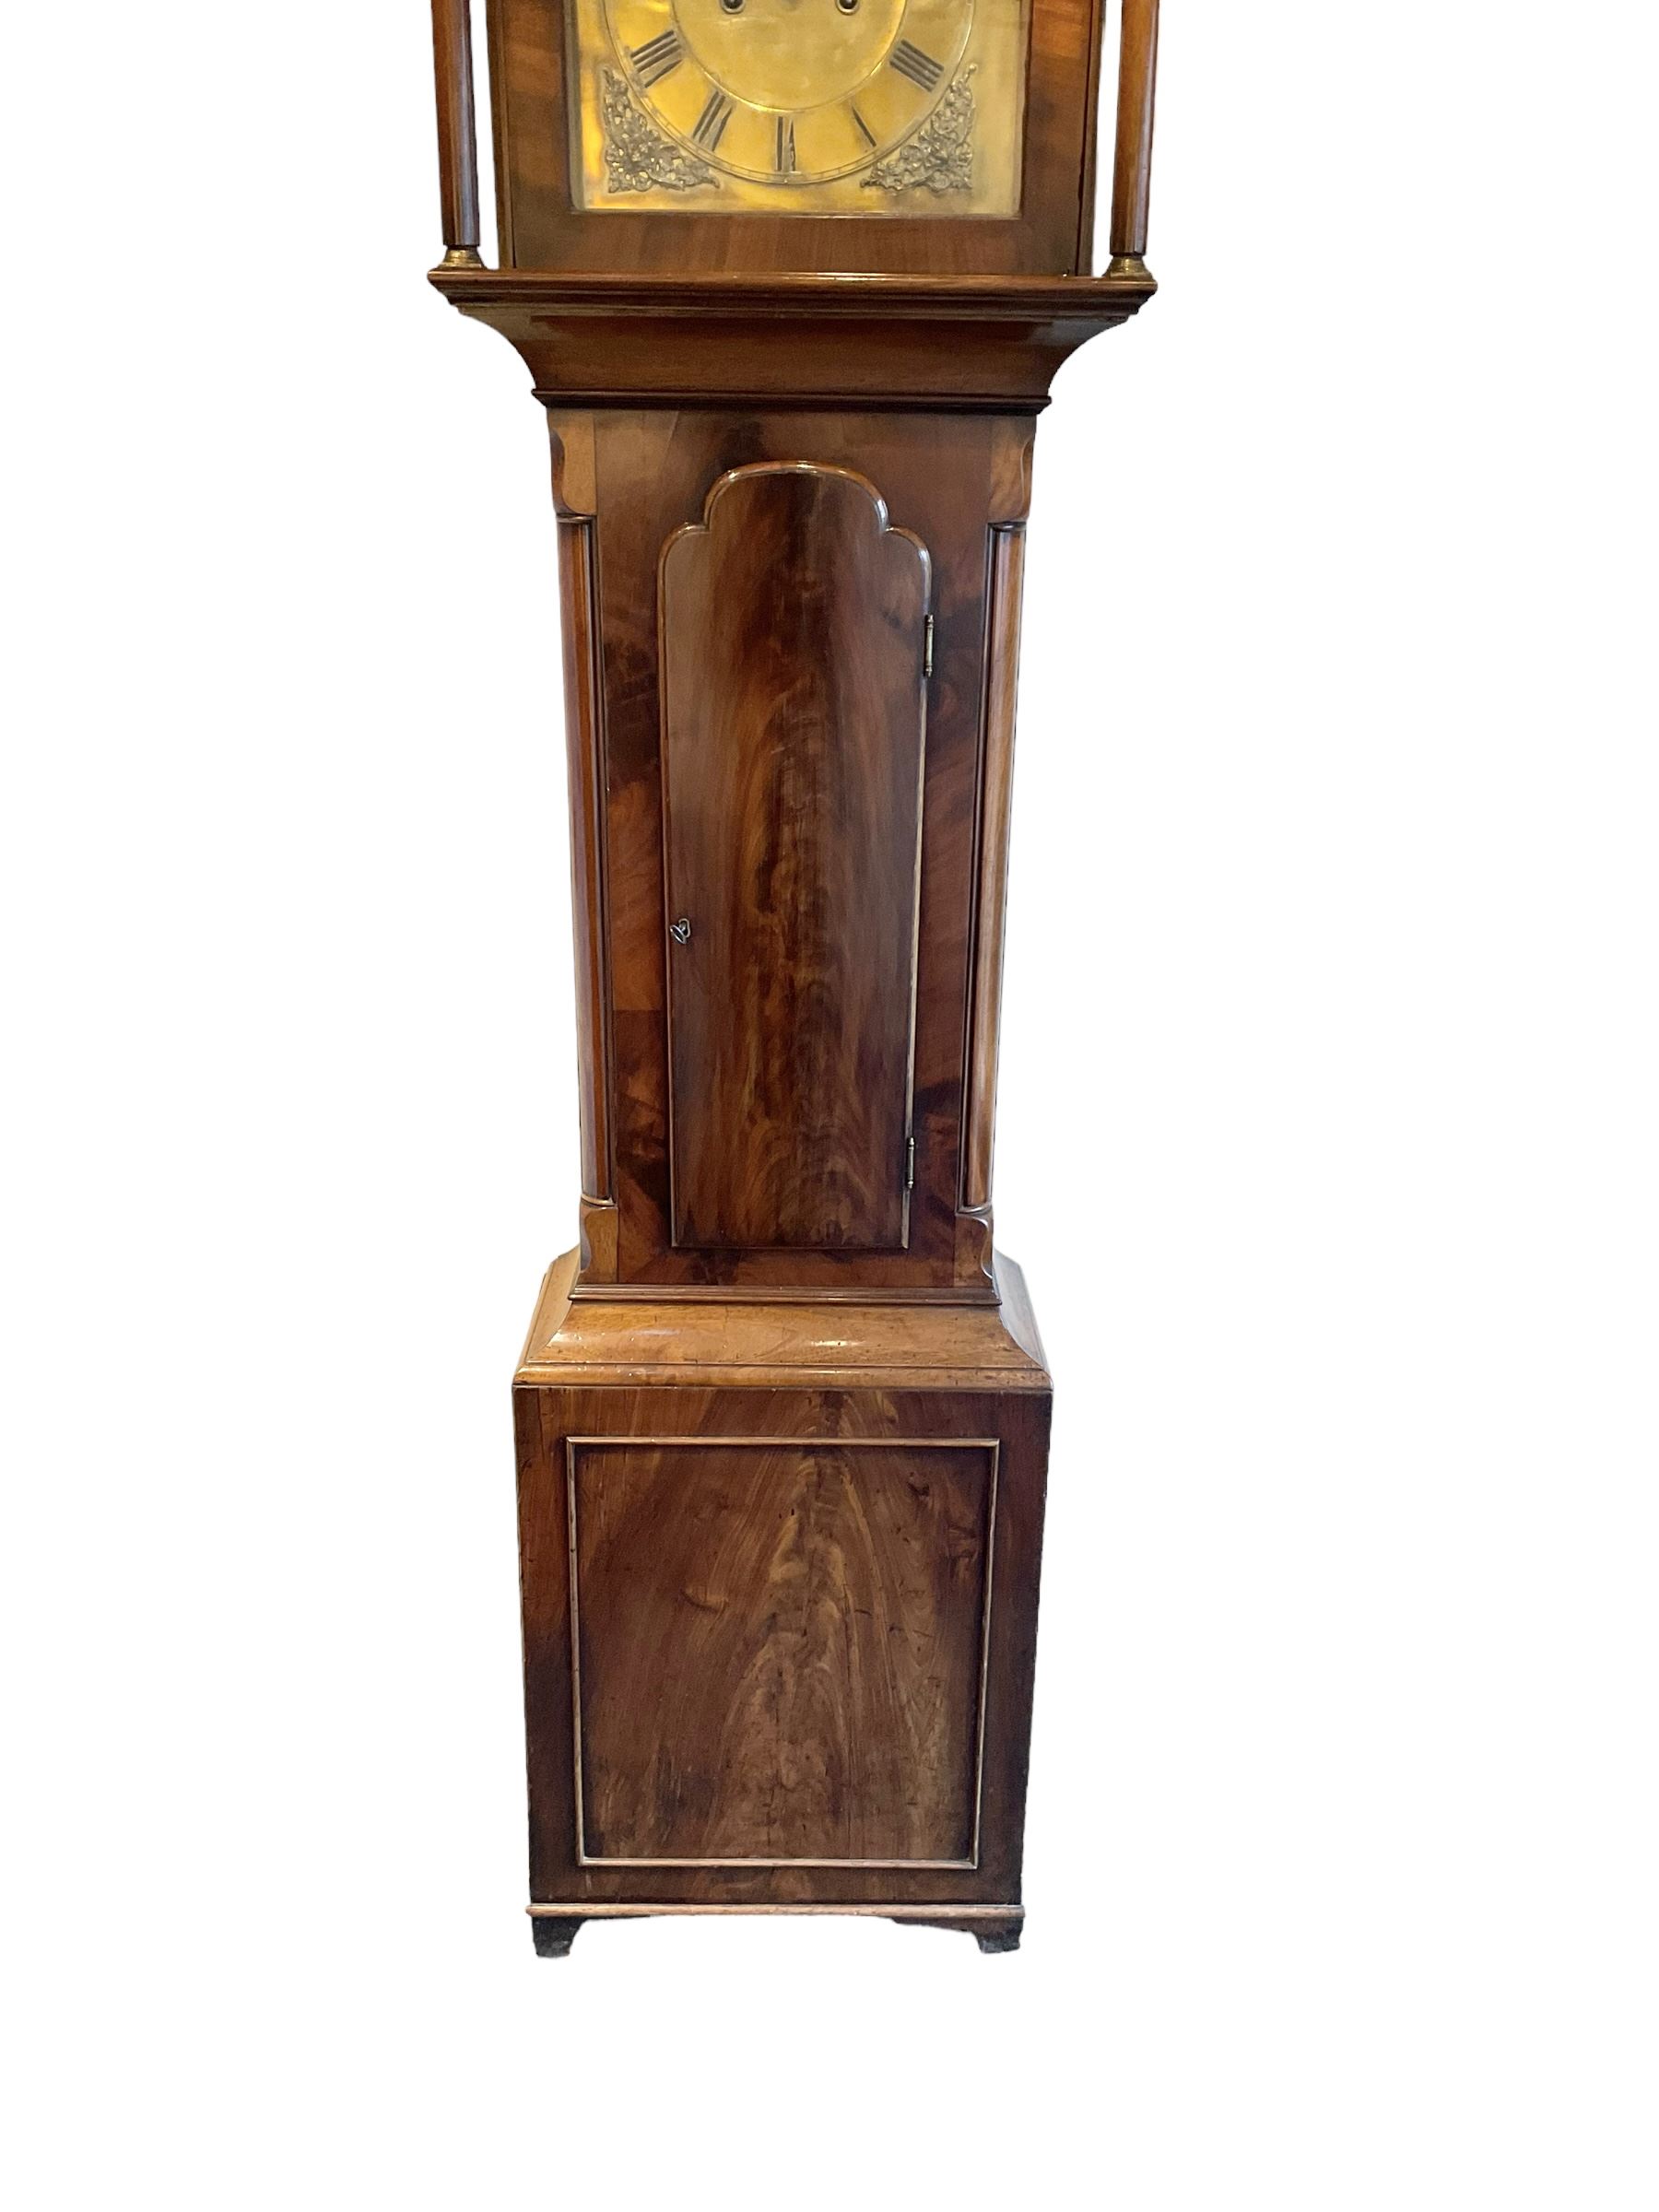 Mahogany - longcase clock with an eight day movement and brass dial - Image 3 of 12